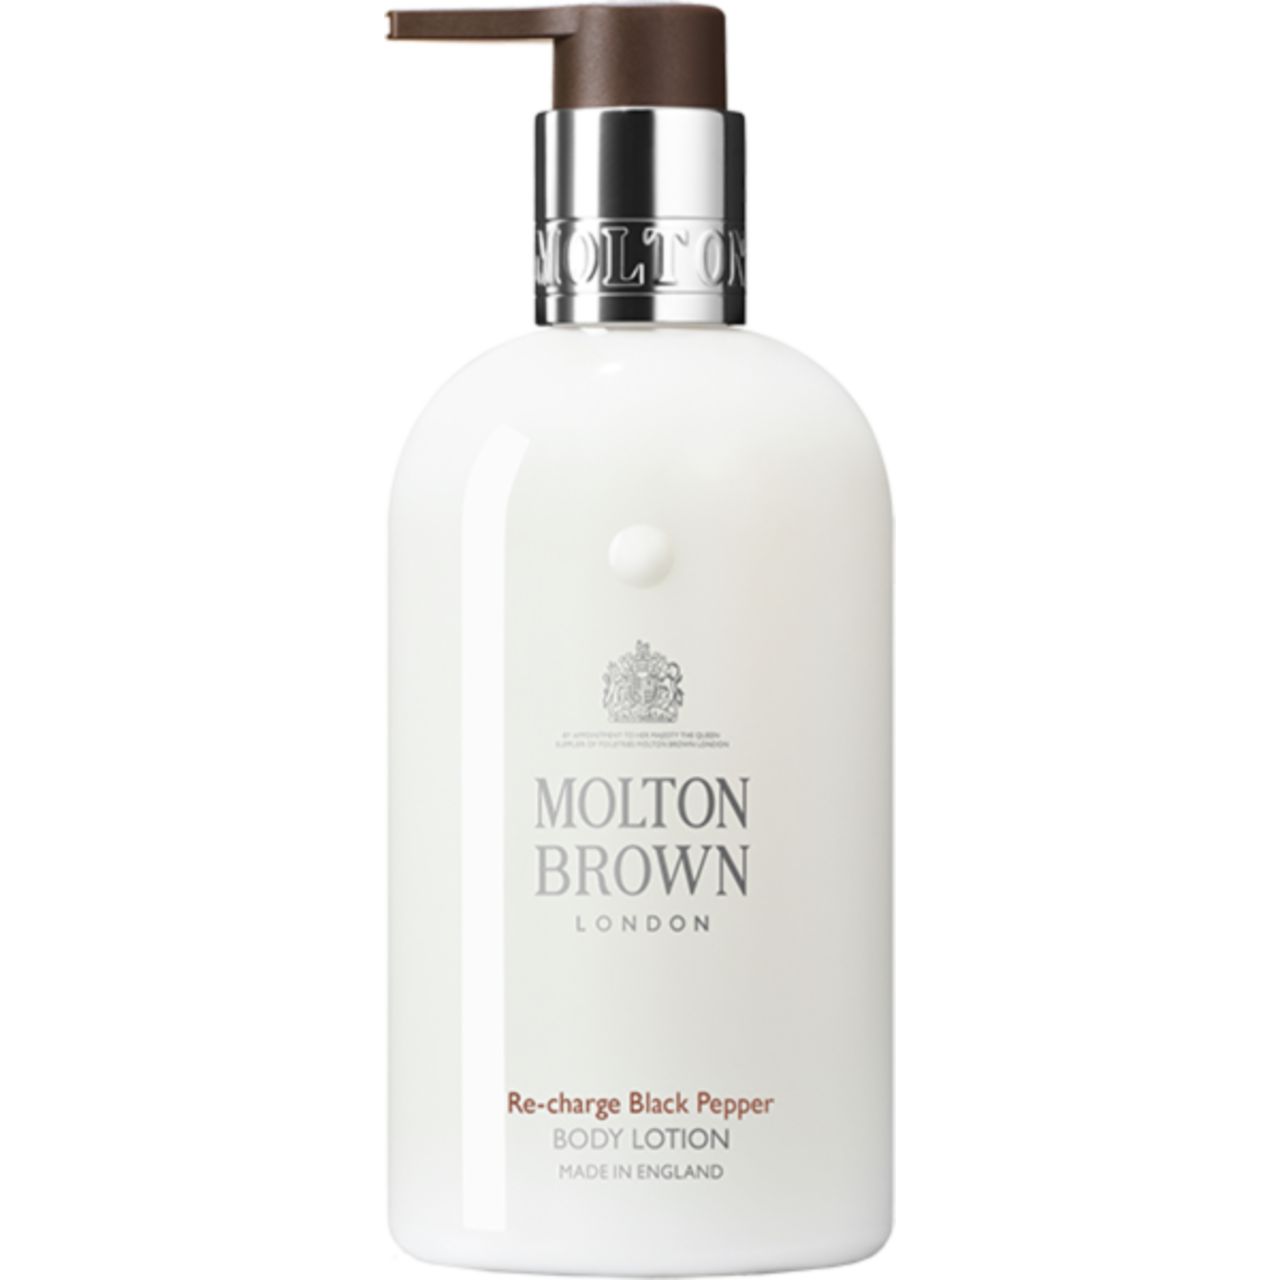 Molton Brown, Re-Charge Black Pepper Body Lotion